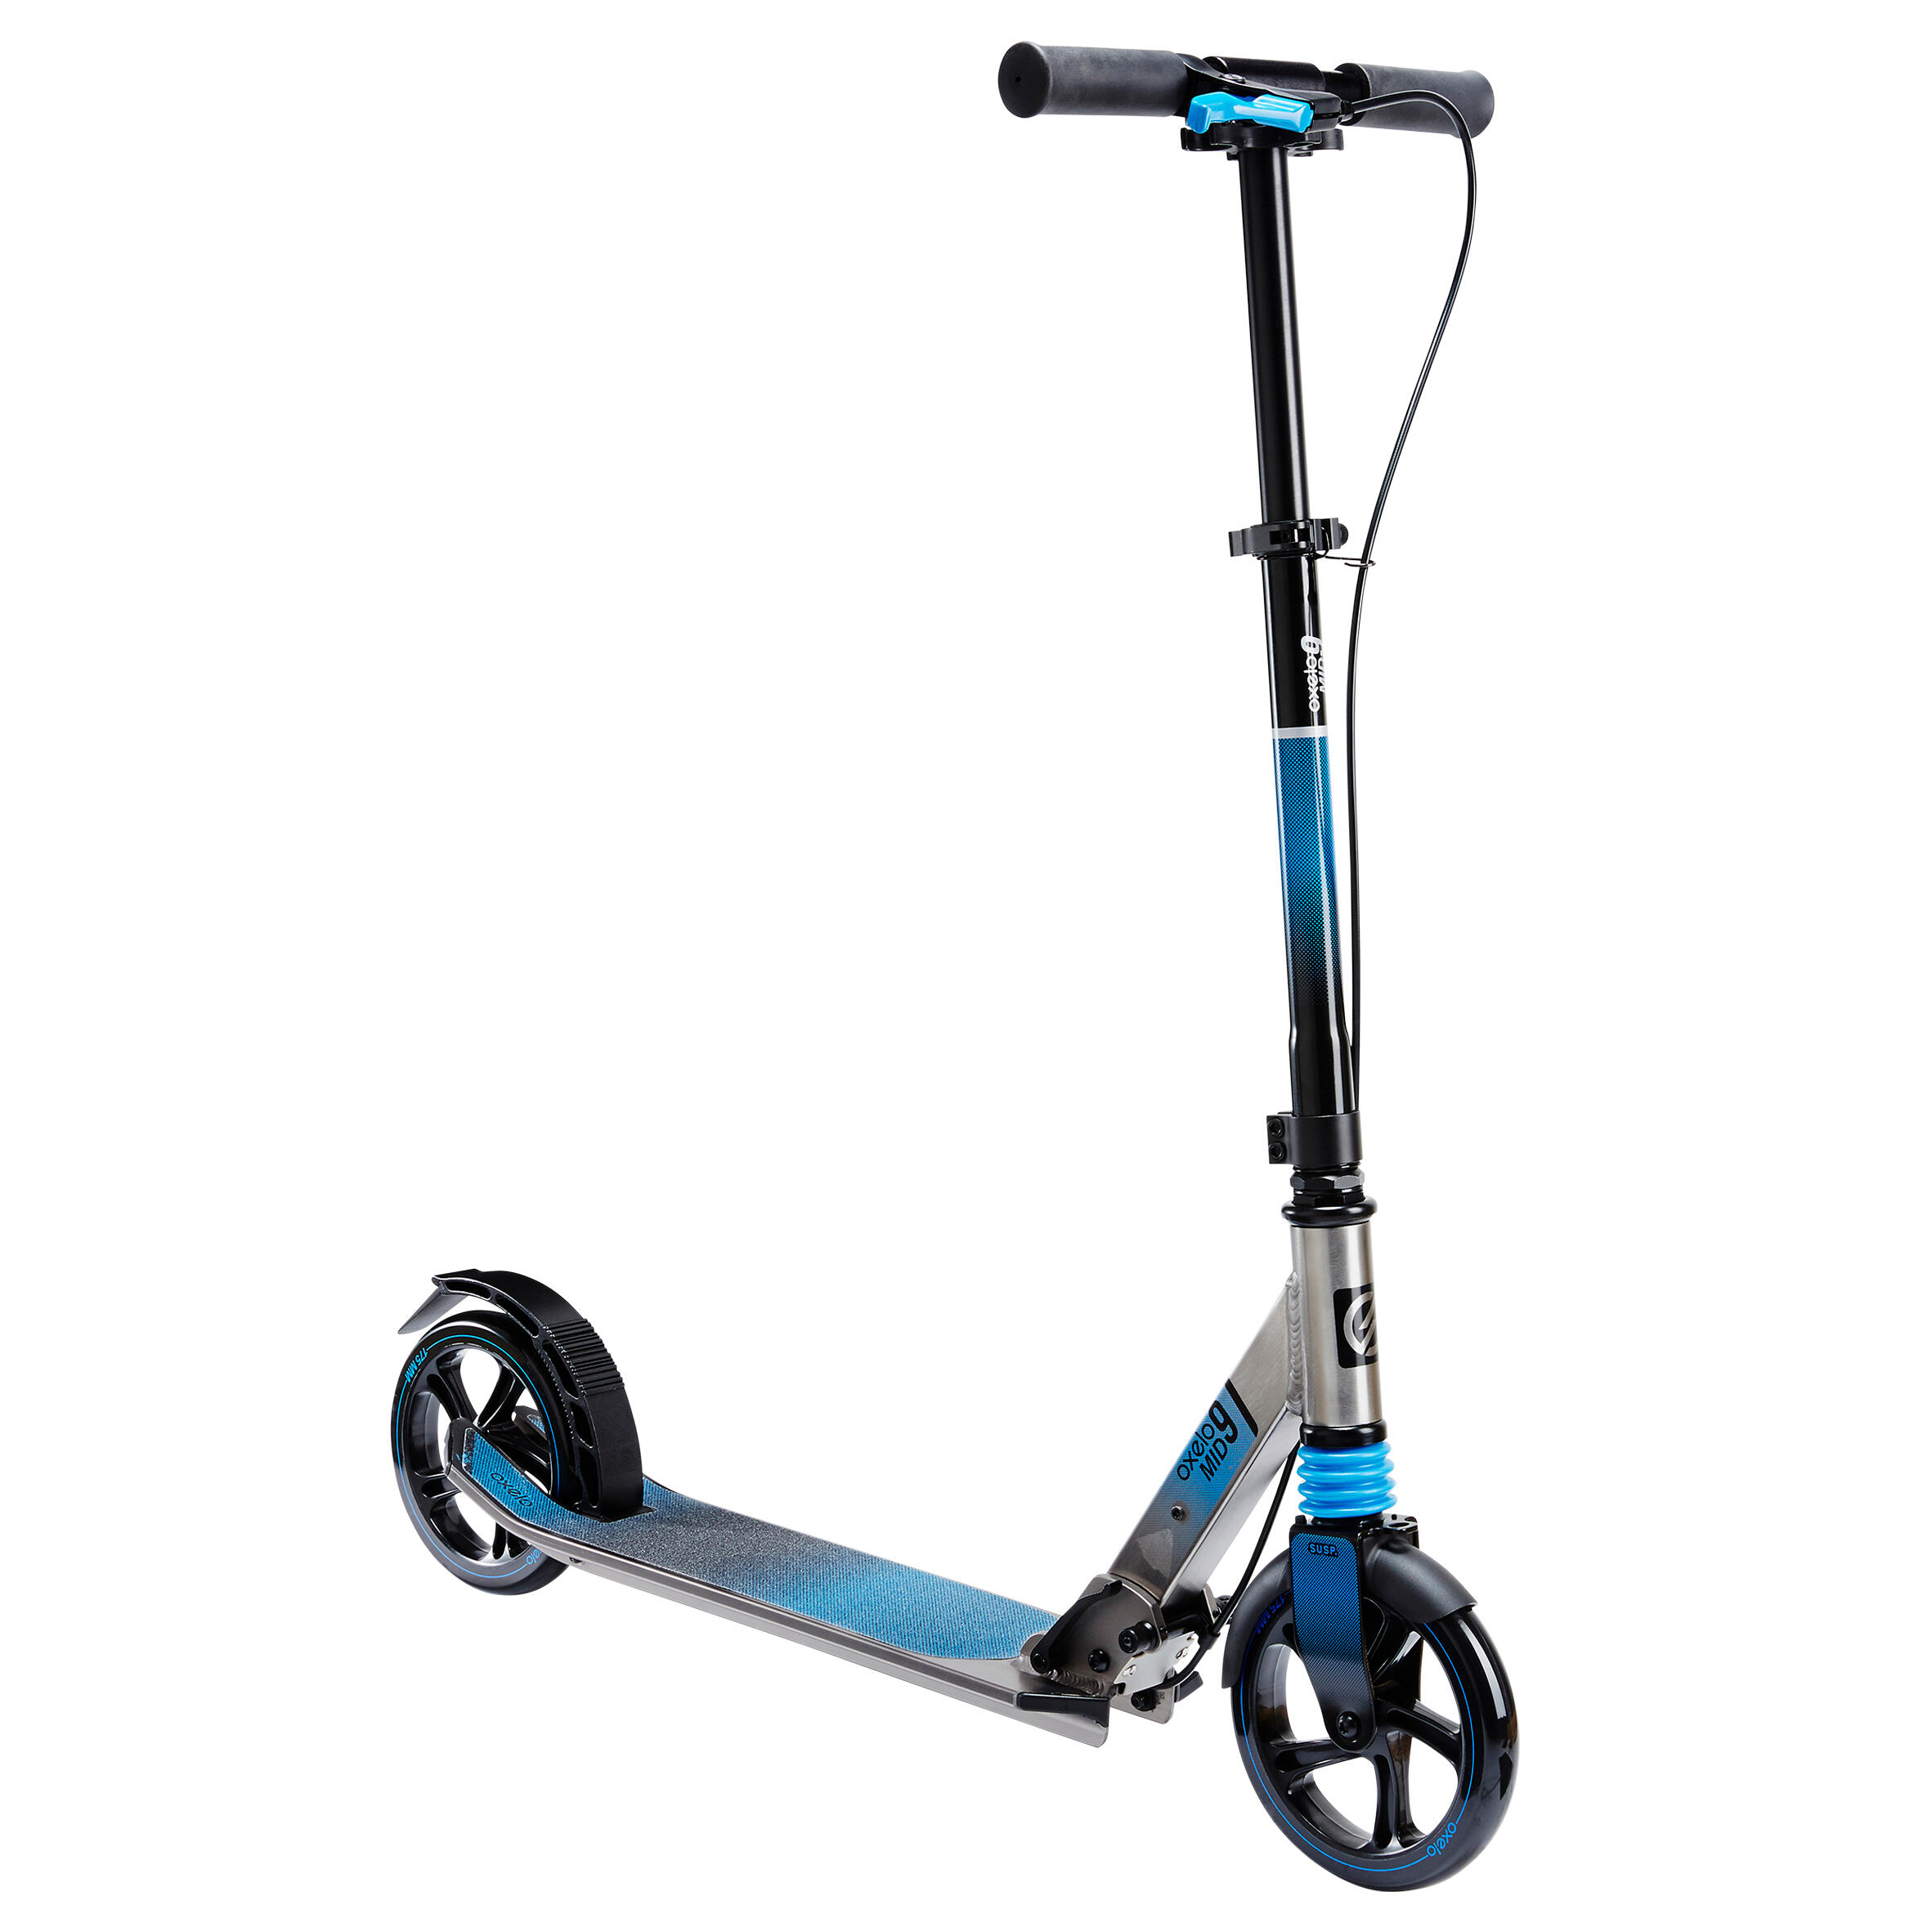 Town 5 XL Adult Scooter - Decathlon